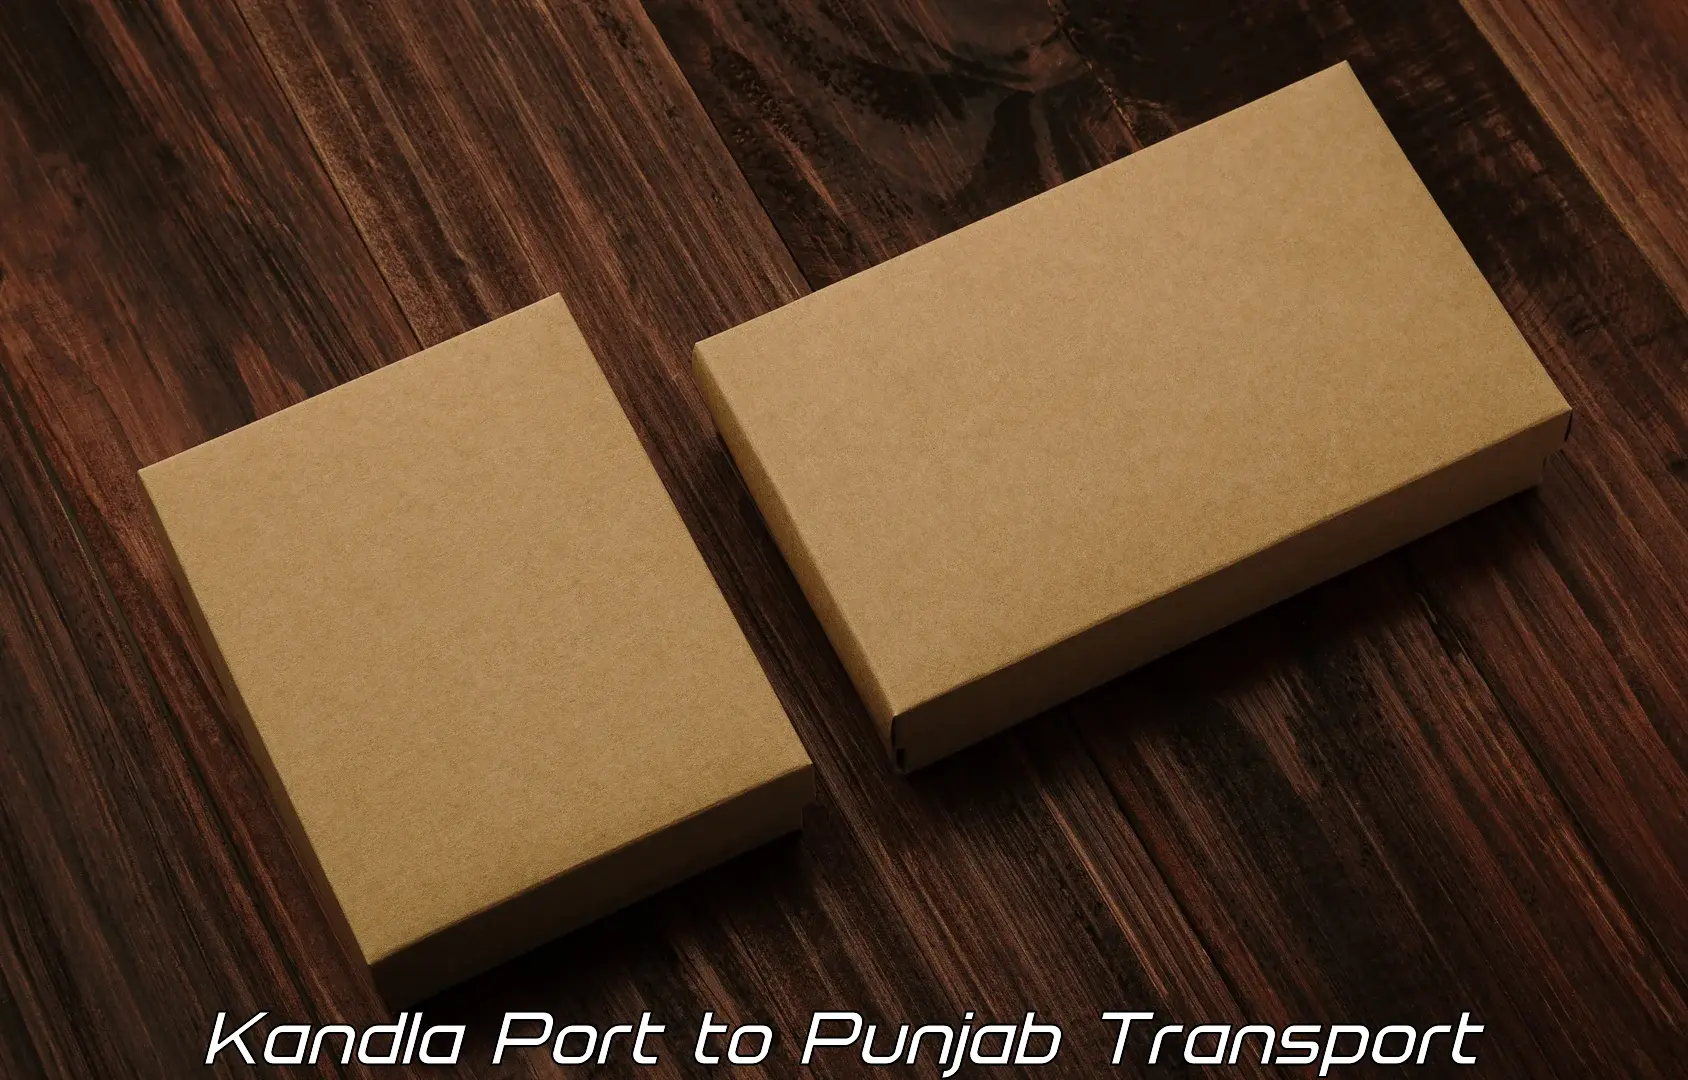 Transport bike from one state to another Kandla Port to Punjab